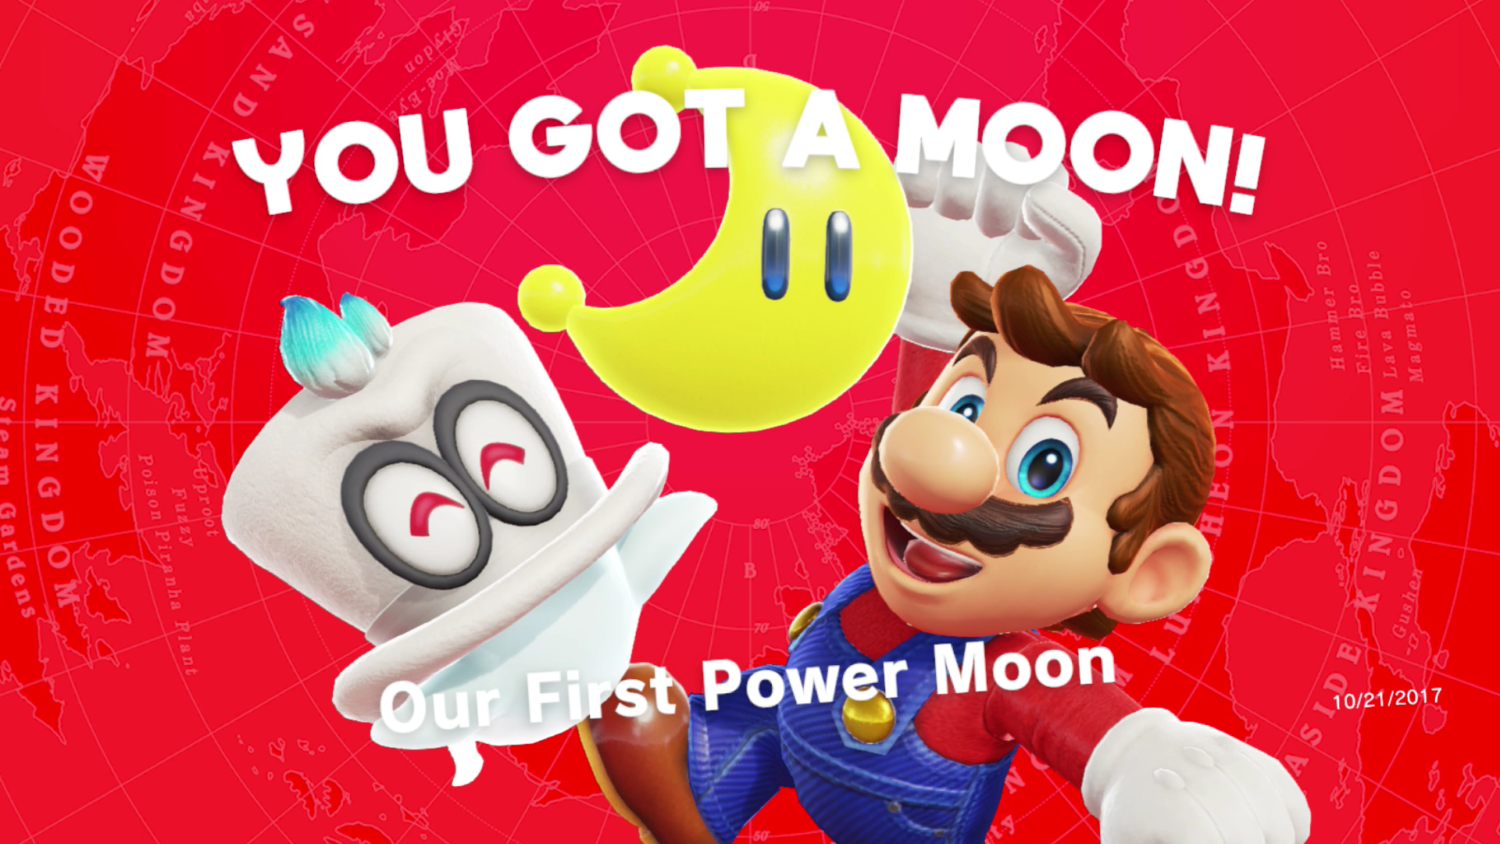 10 Super Mario Odyssey tips: An essential guide to Moons, hats